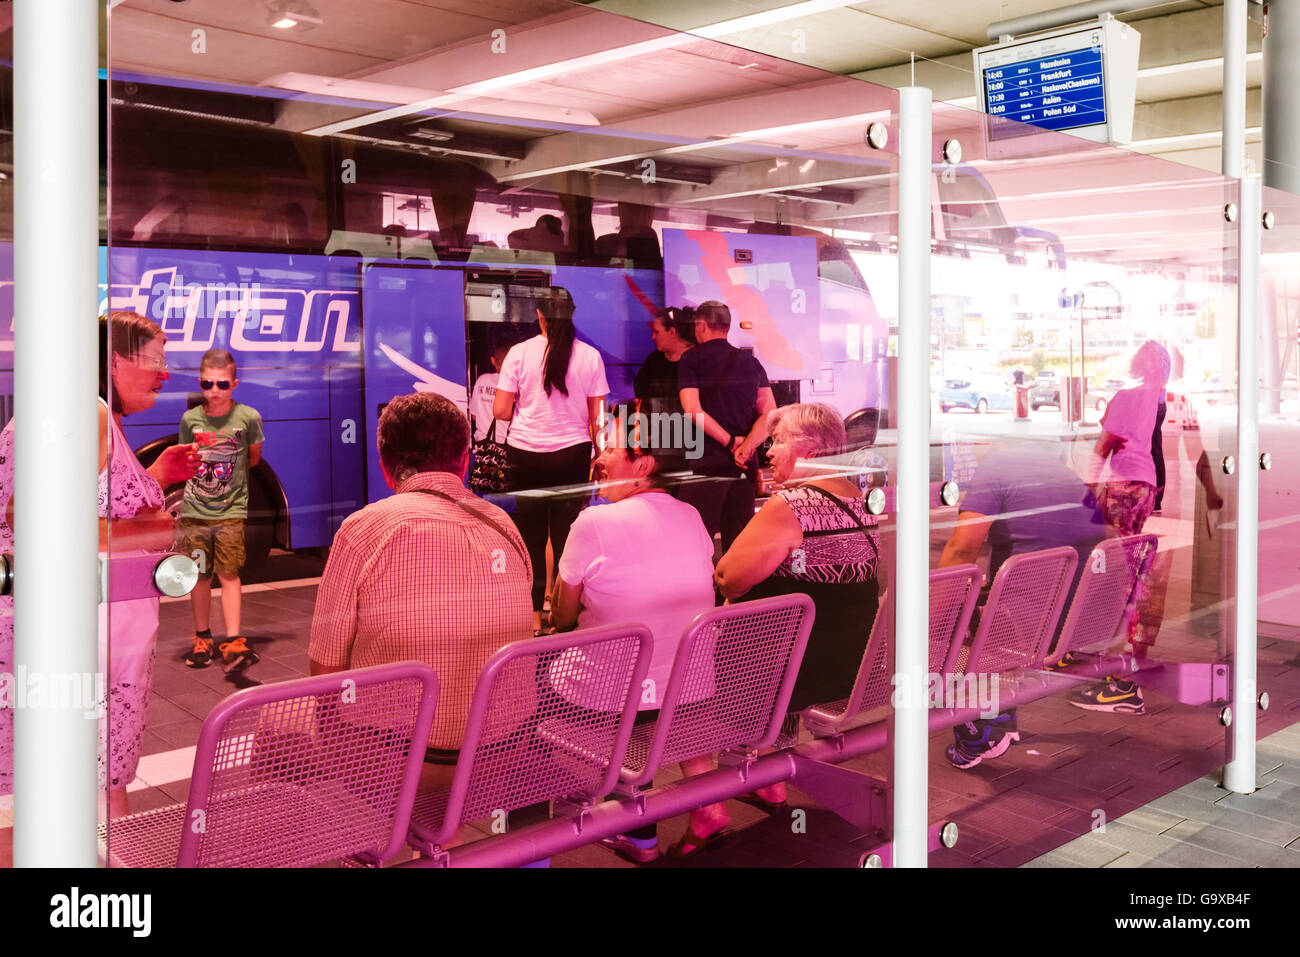 Stuttgart, Germany - June 25, 2016: People waiting for a bus as seen through modern pink glass in the new Stuttgart Central Bus Stock Photo